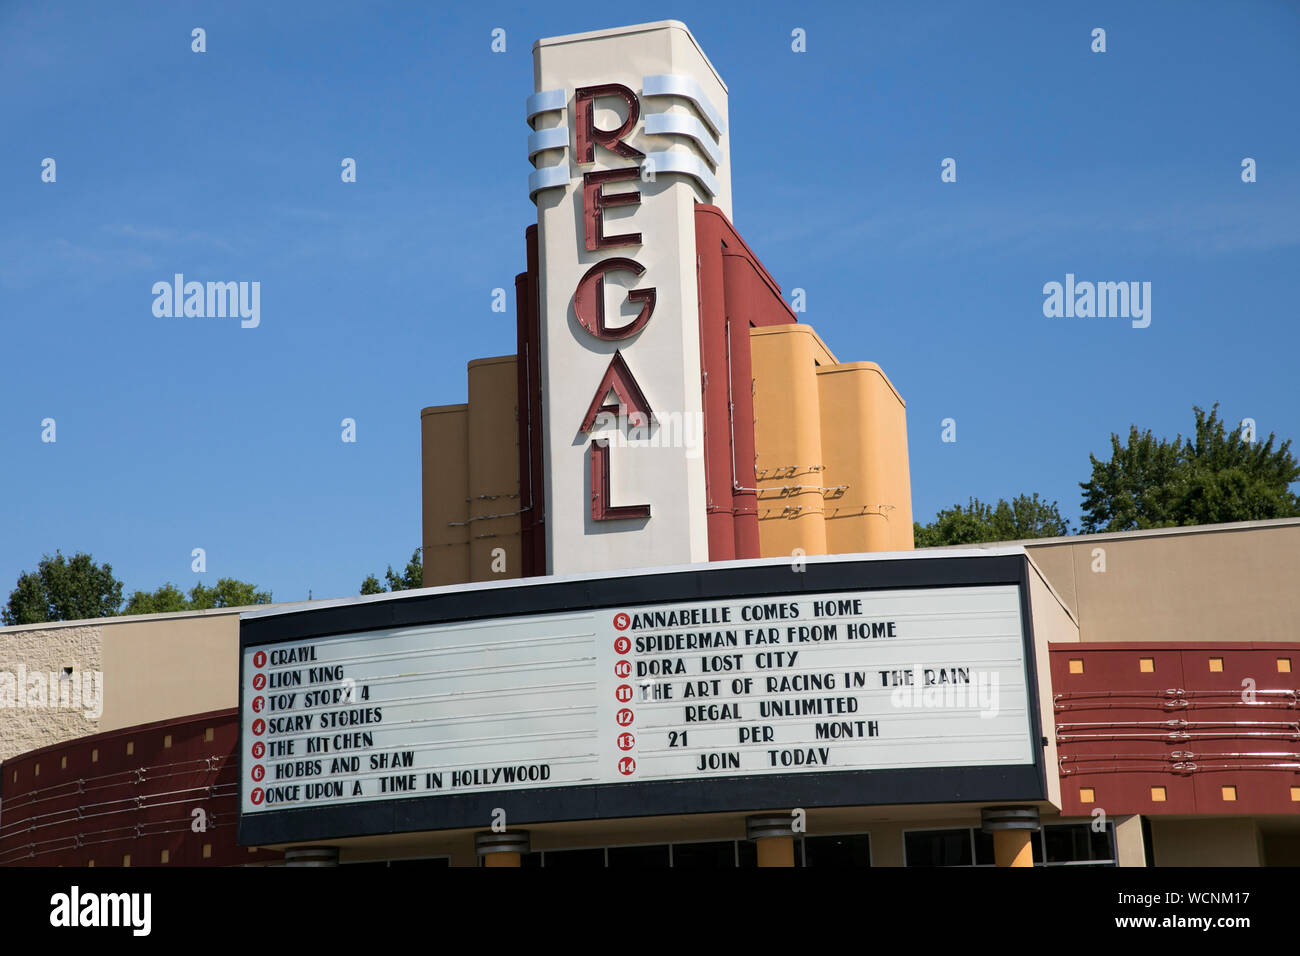 A logo sign outside of a Regal movie theater location in Niles, Ohio on August 12, 2019. Stock Photo